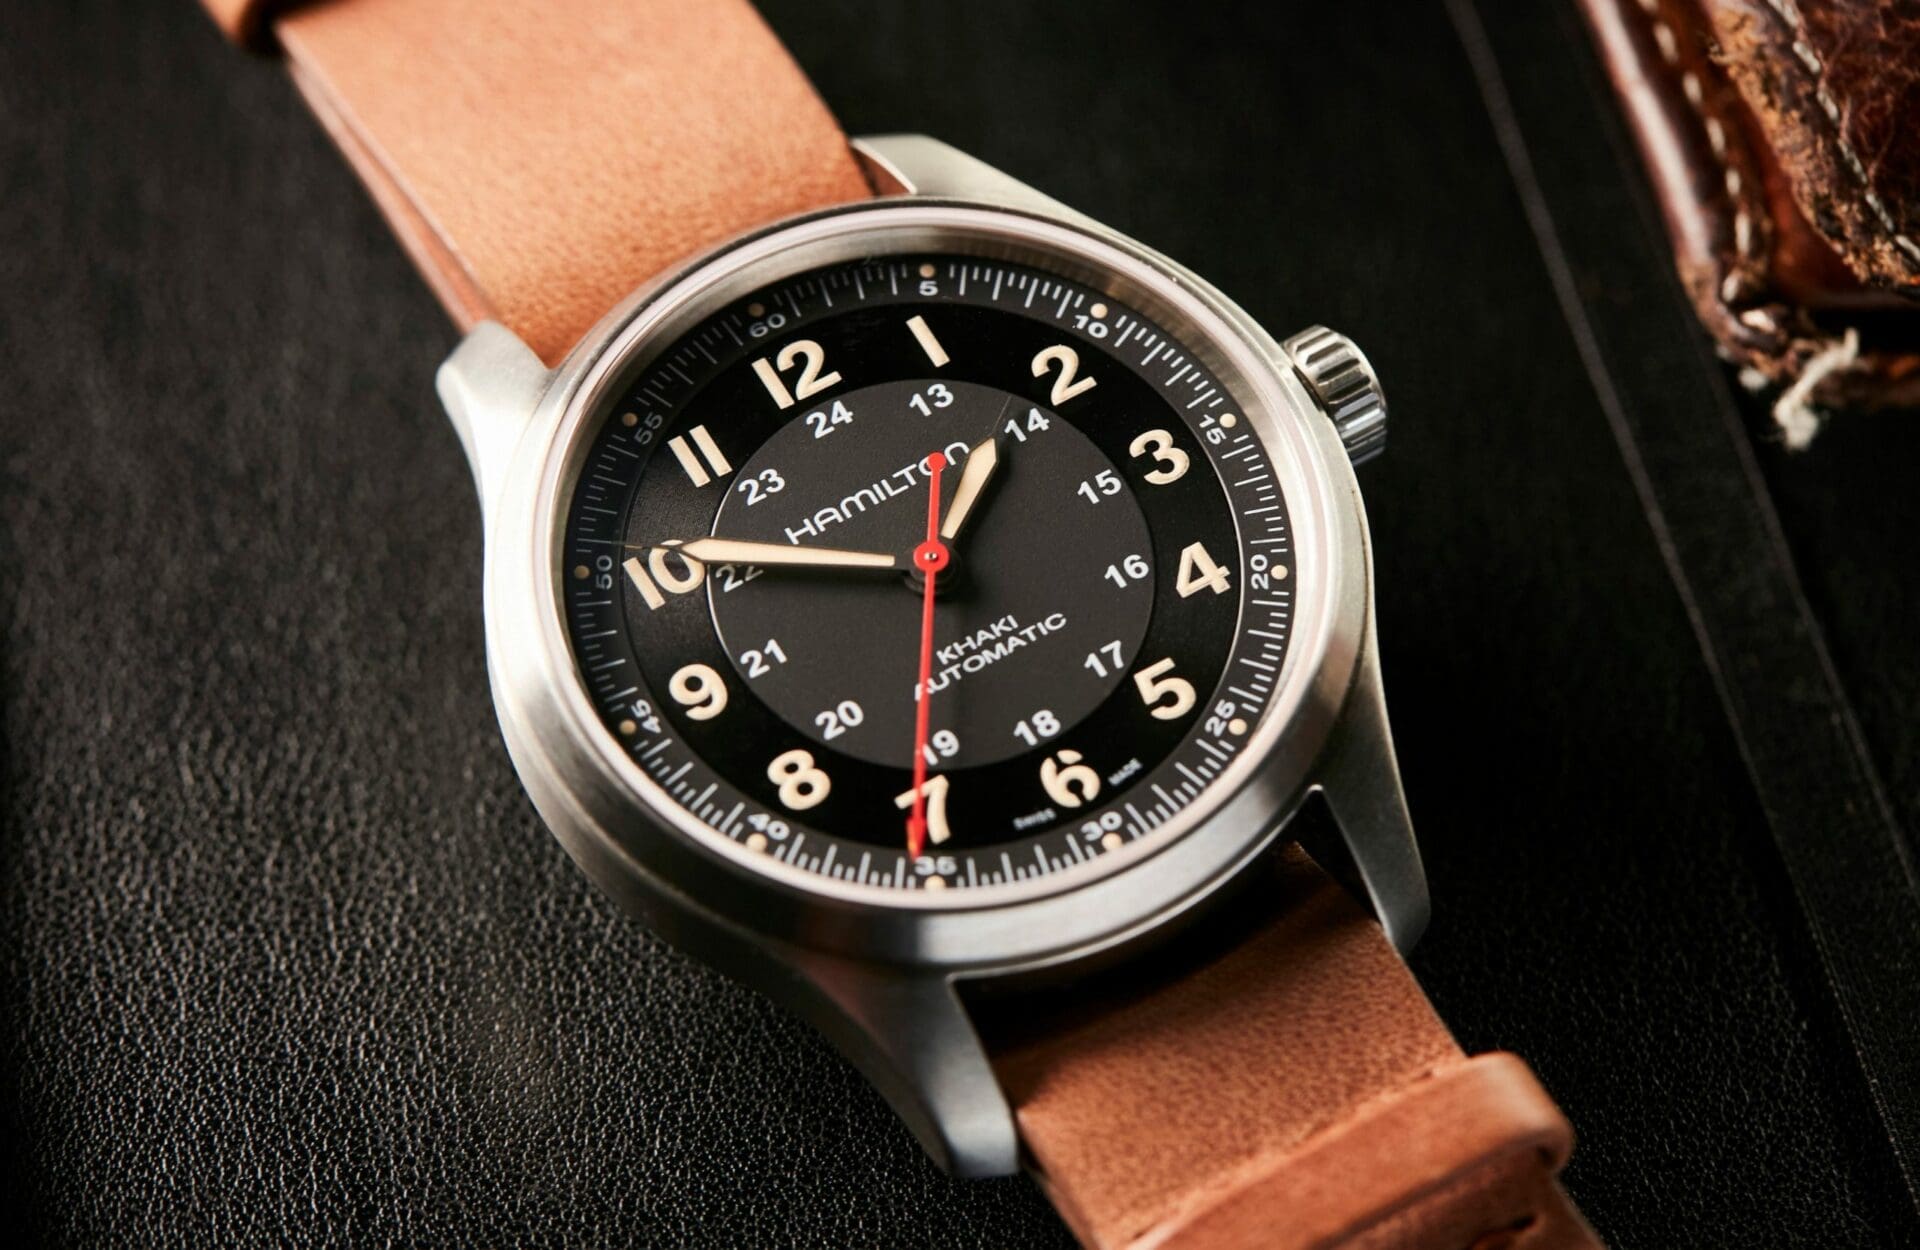 VIDEO: Hamilton is levelling up the Khaki Field Collection with the new Hamilton x Far Cry 6 Limited Edition Khaki Field Titanium